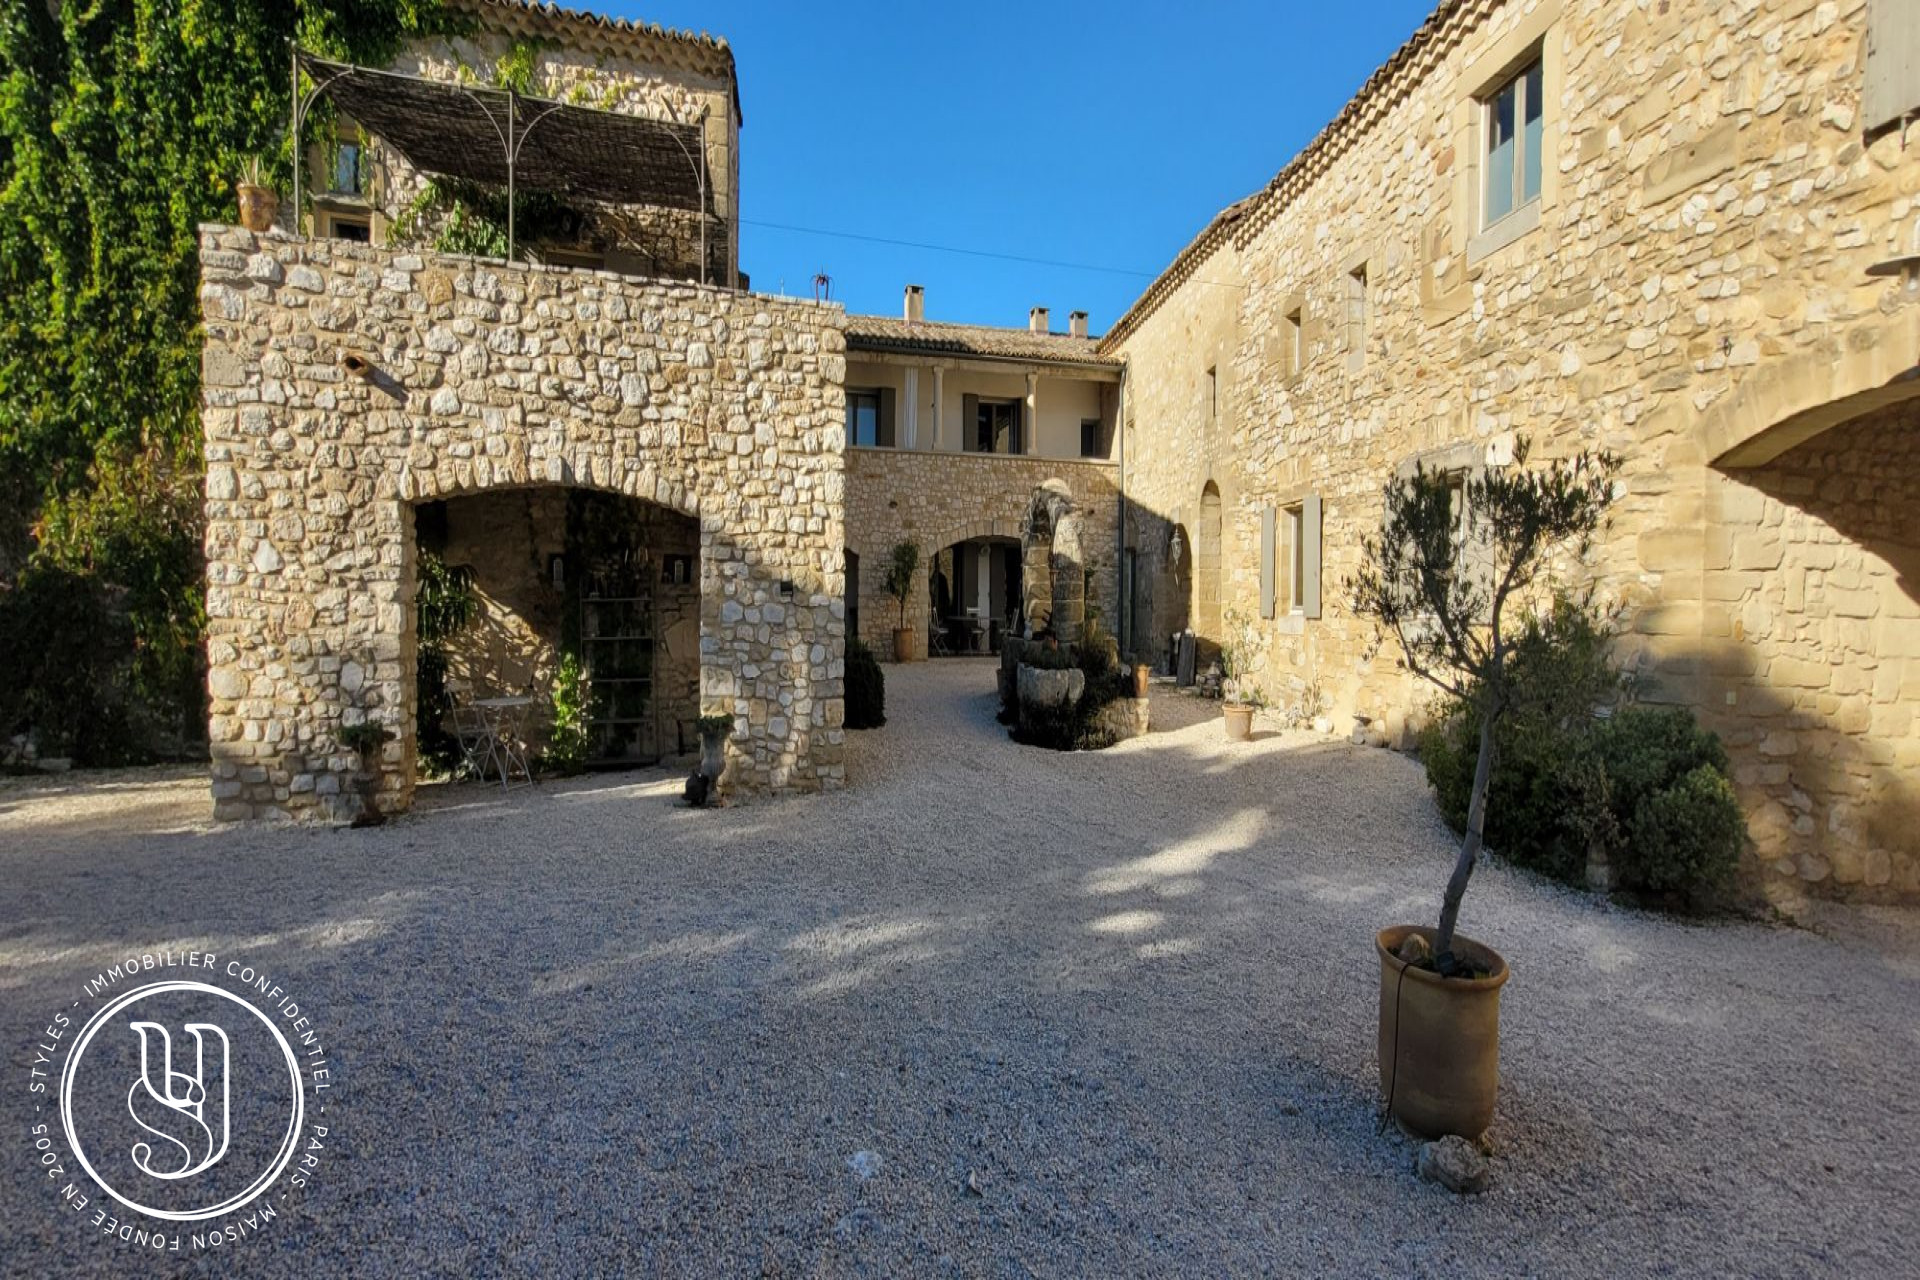 Uzès - nearby, a charming area, like in Tuscany - image 9